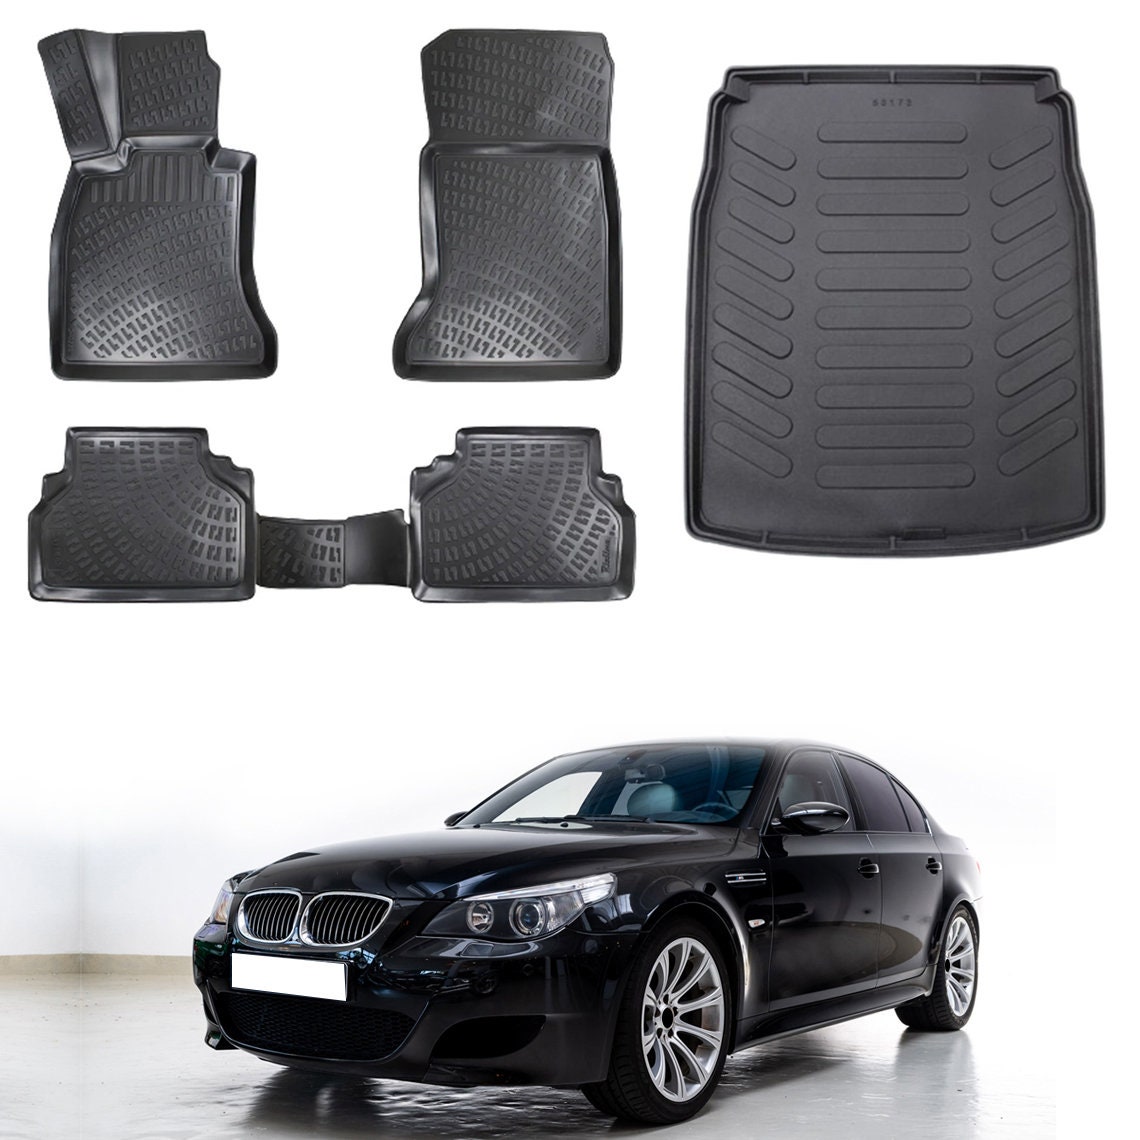 Buy Bmw E60 Car Mats Online In India -  India